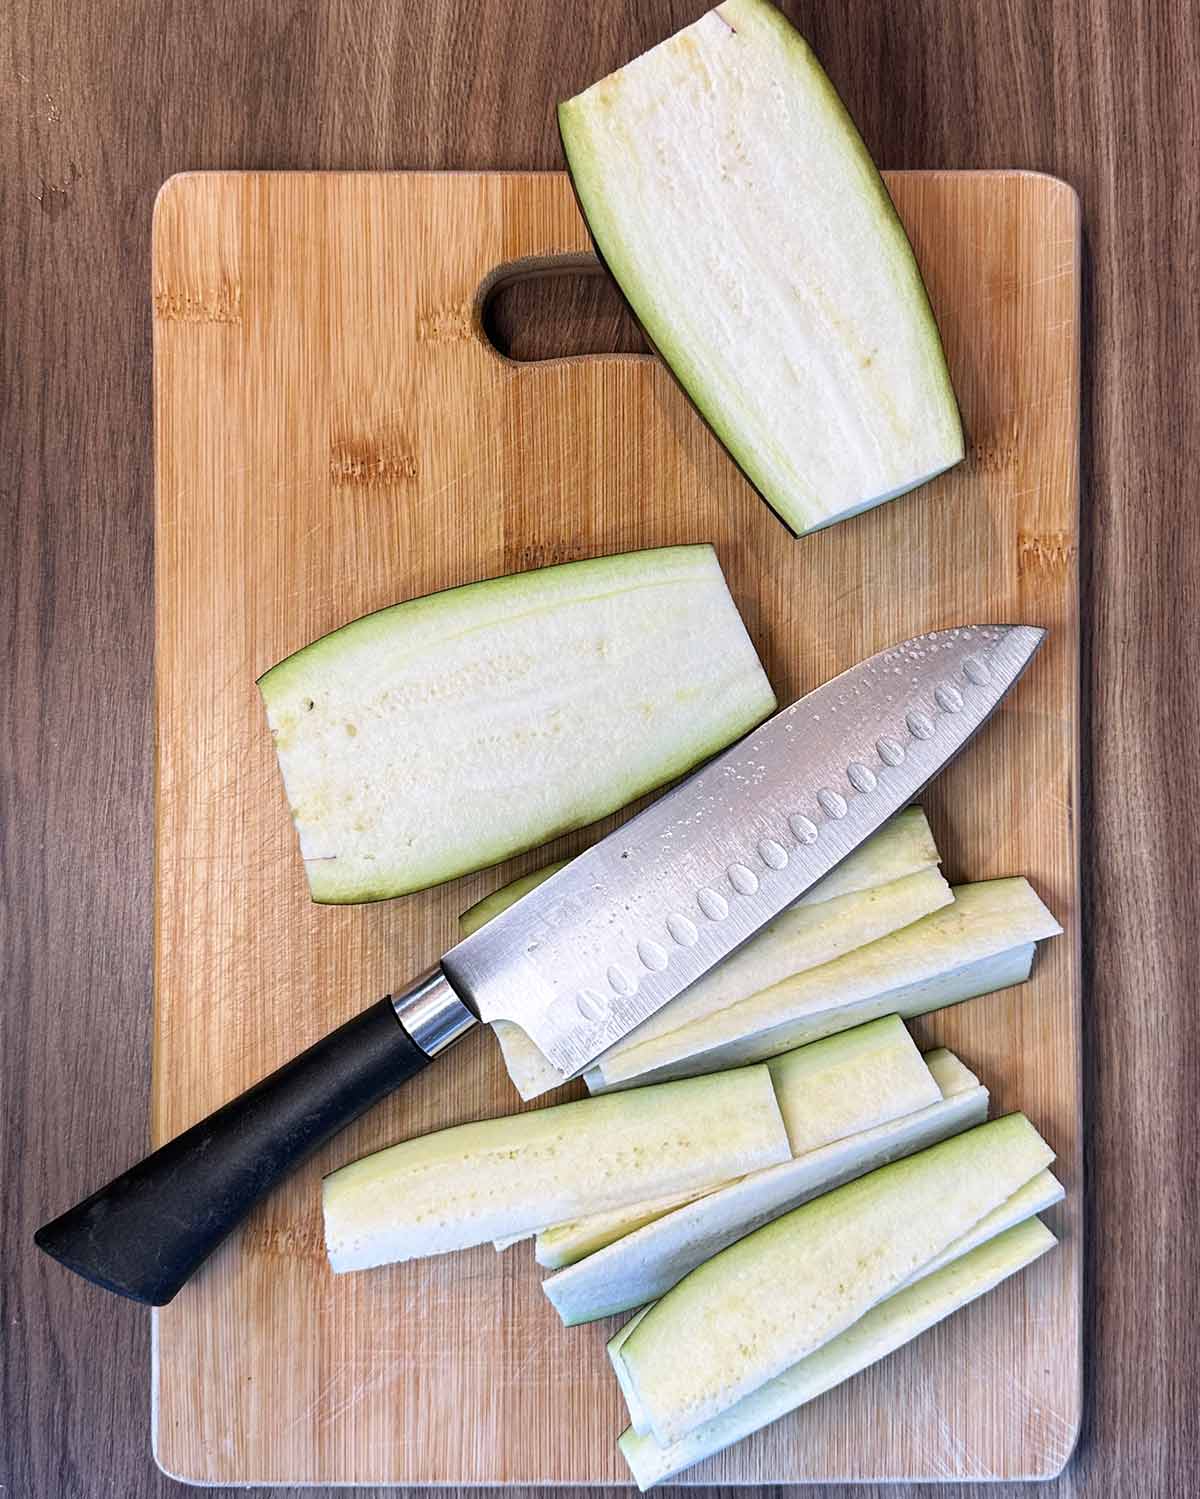 Aubergines being sliced into strips on a wooden chopping board.